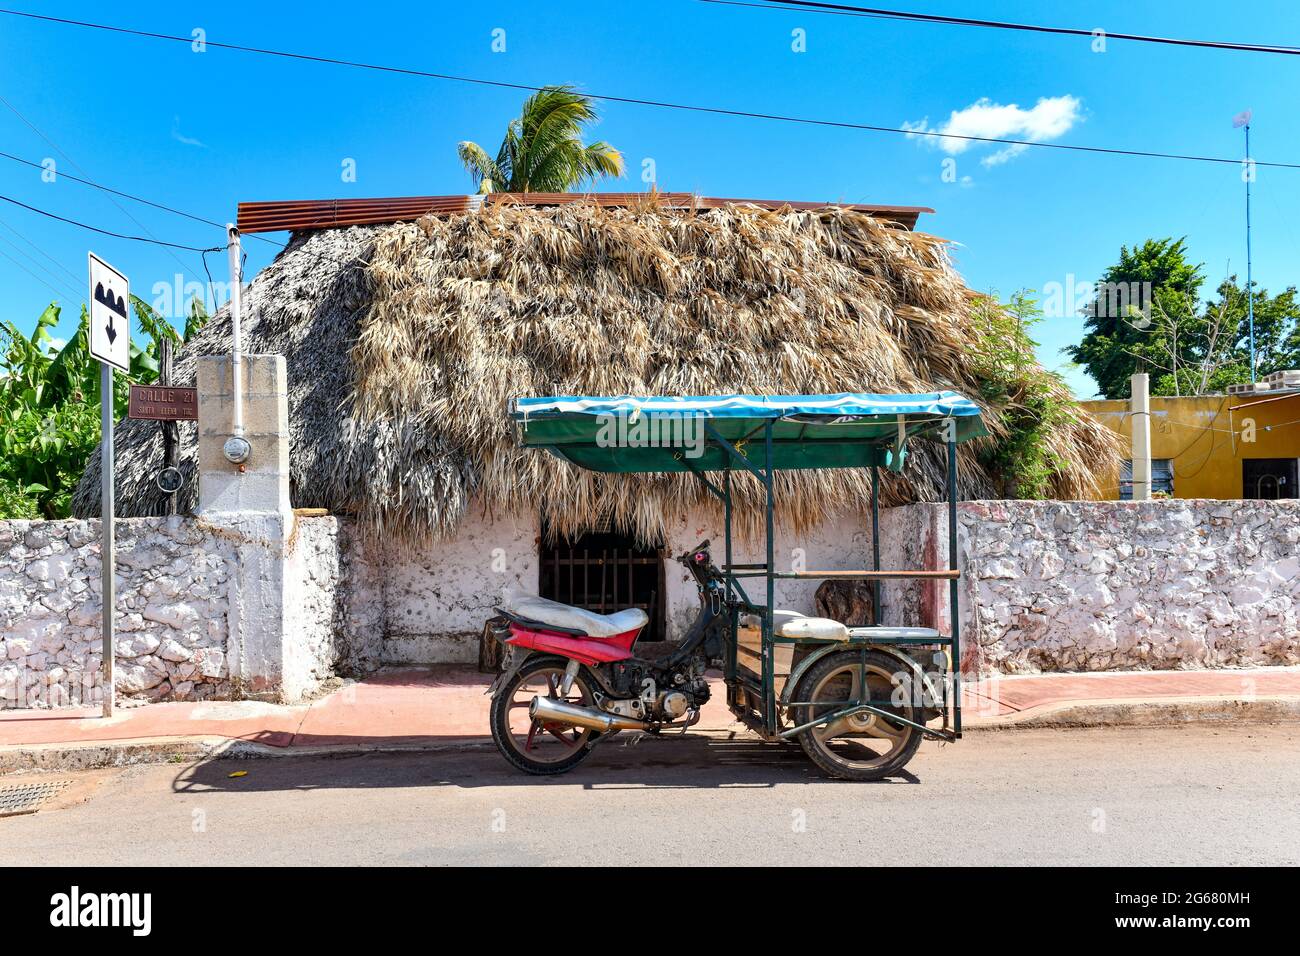 A retrofitted motorcycle, a form of local transportation in Santa Elena, Mexico in the Yucatan. Stock Photo